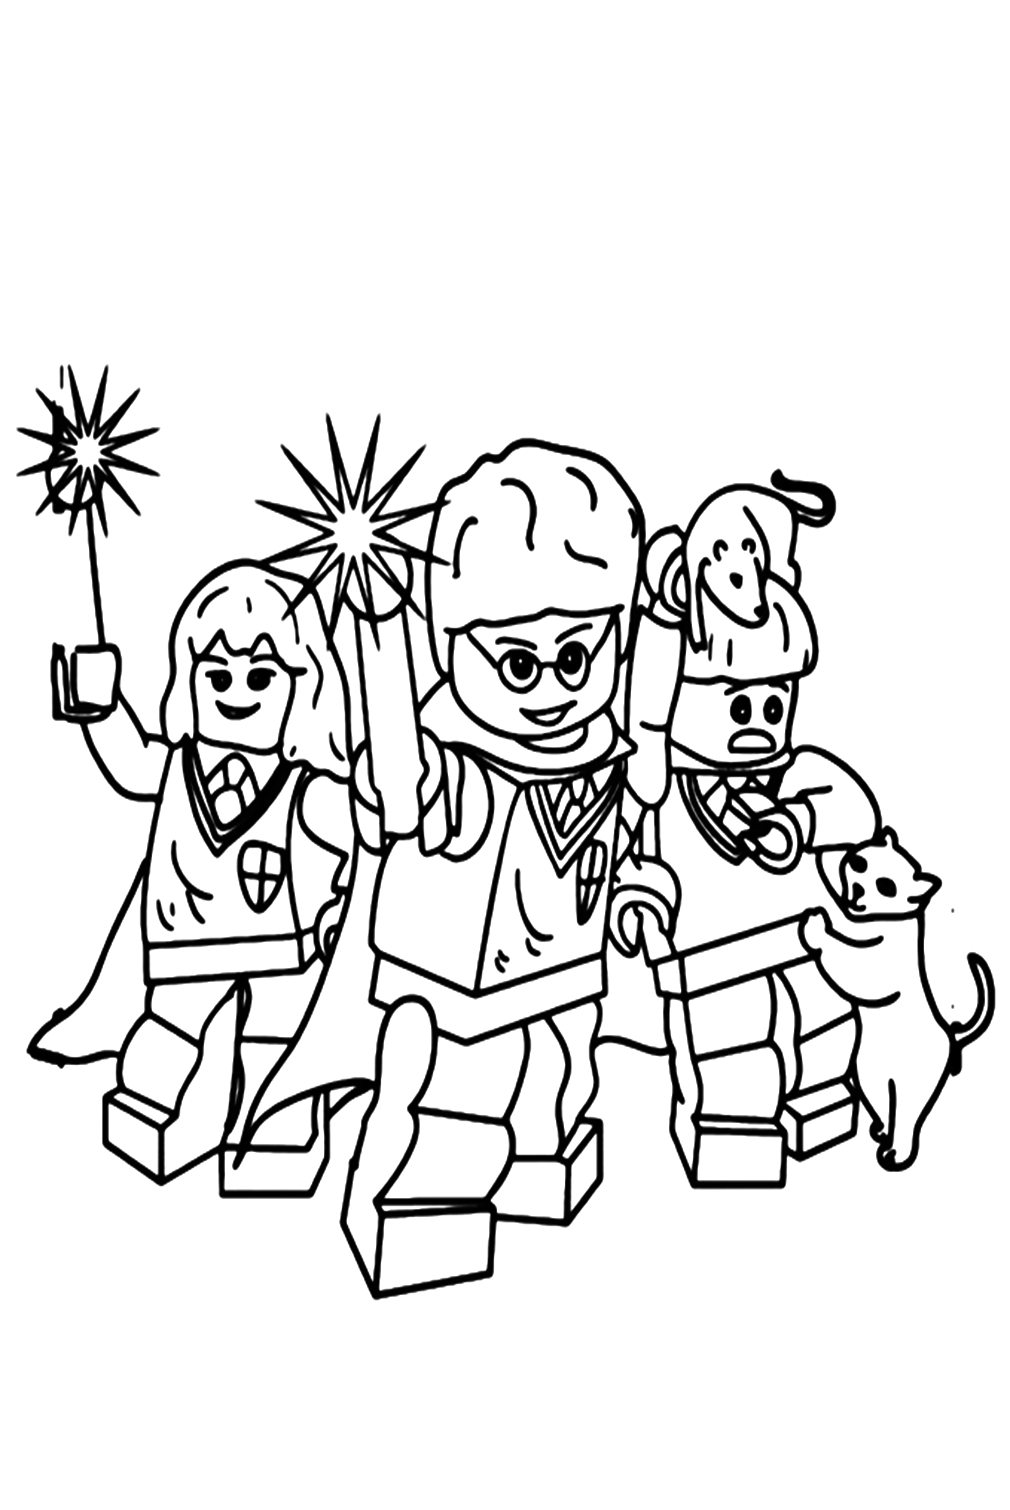 Allies Ninja From Lego Ninjago Play Firework Coloring Pages